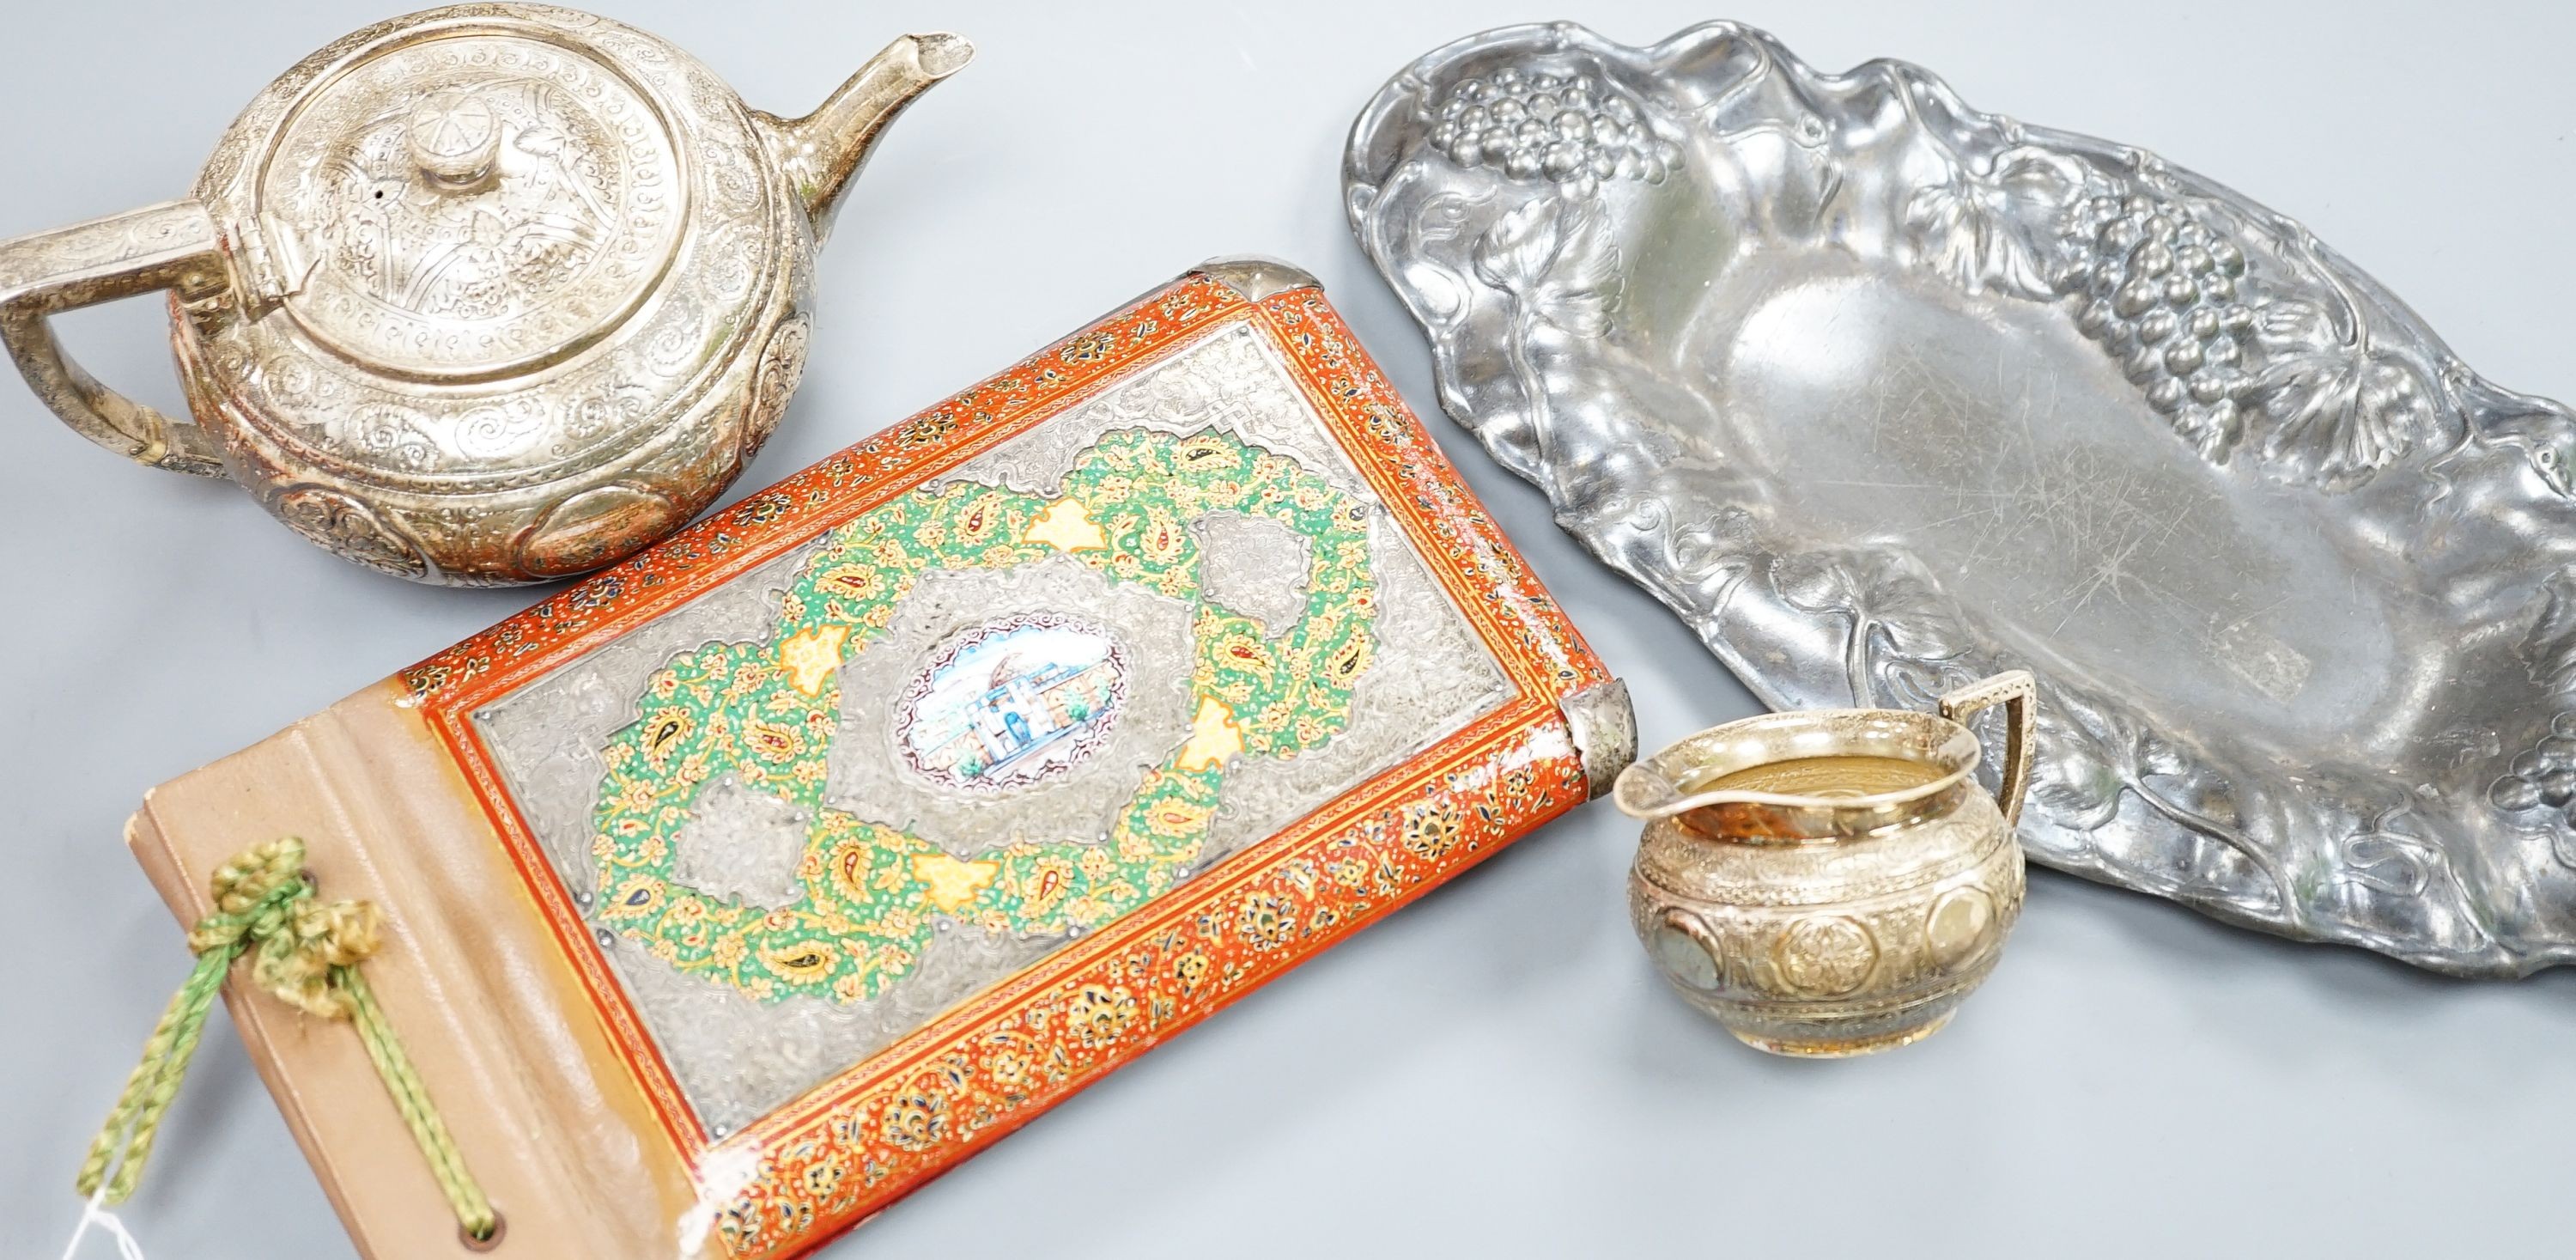 A WMF dish, Islamic white metal mounted photo album and a plated teapot and jug